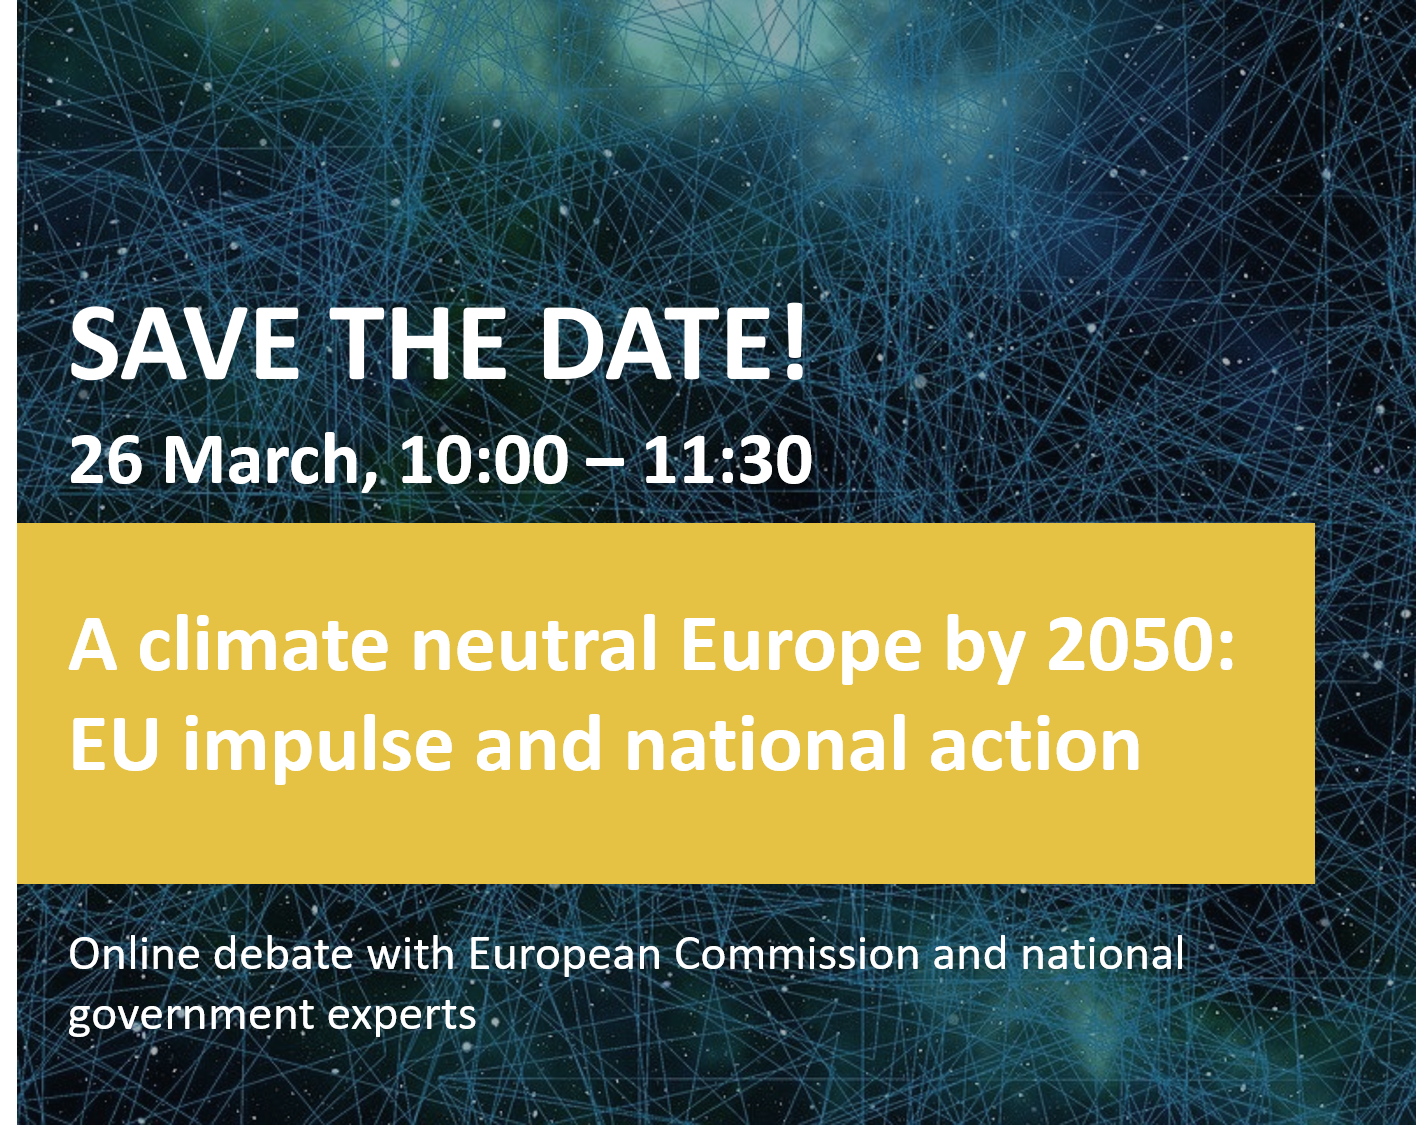 Online debate on "A climate neutral Europe by 2050